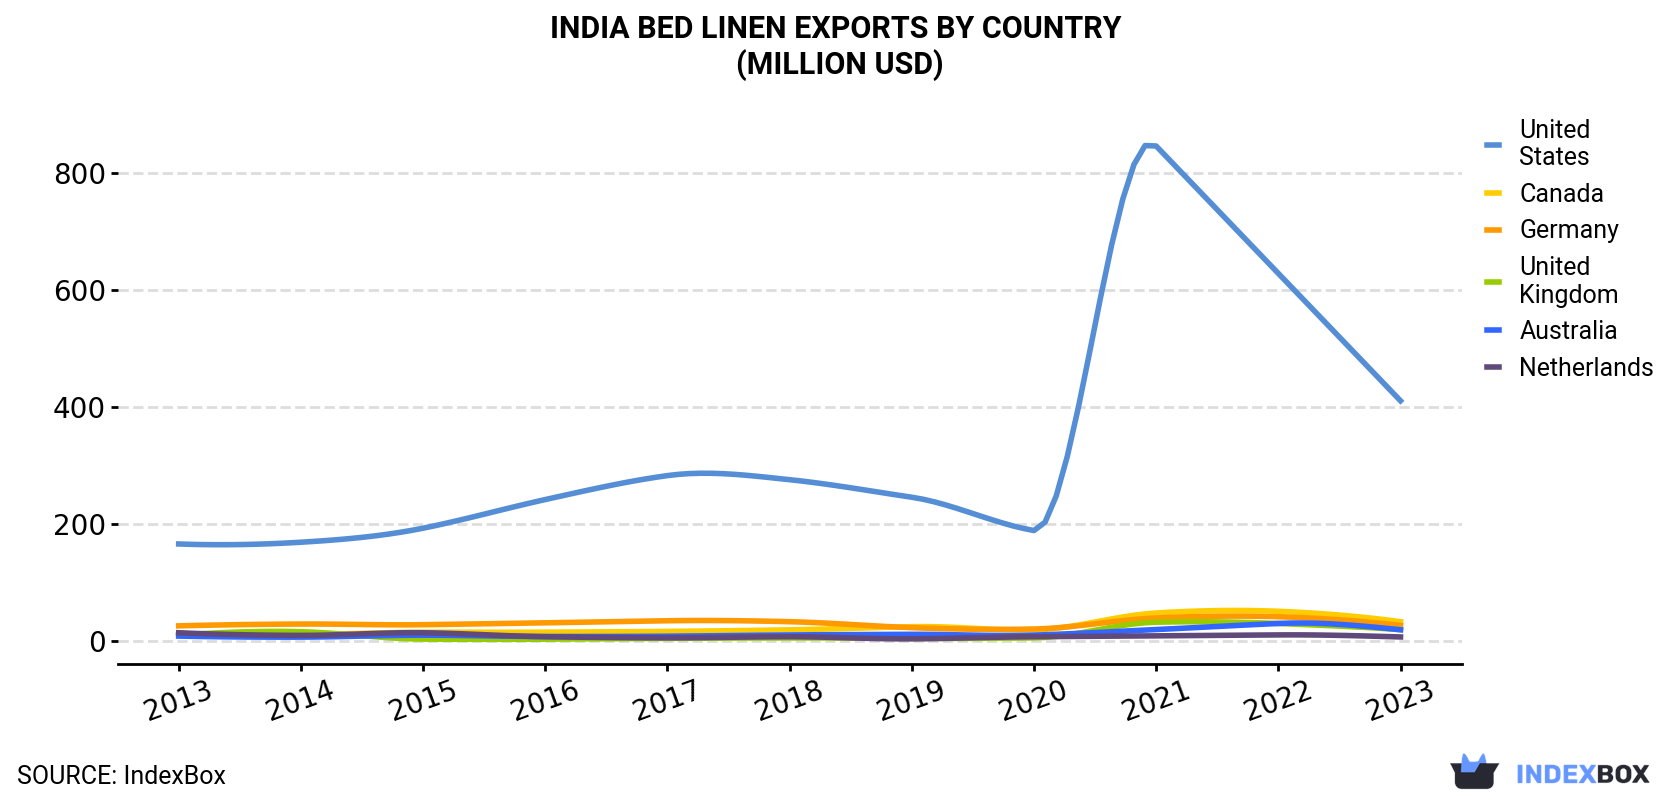 India Bed Linen Exports By Country (Million USD)